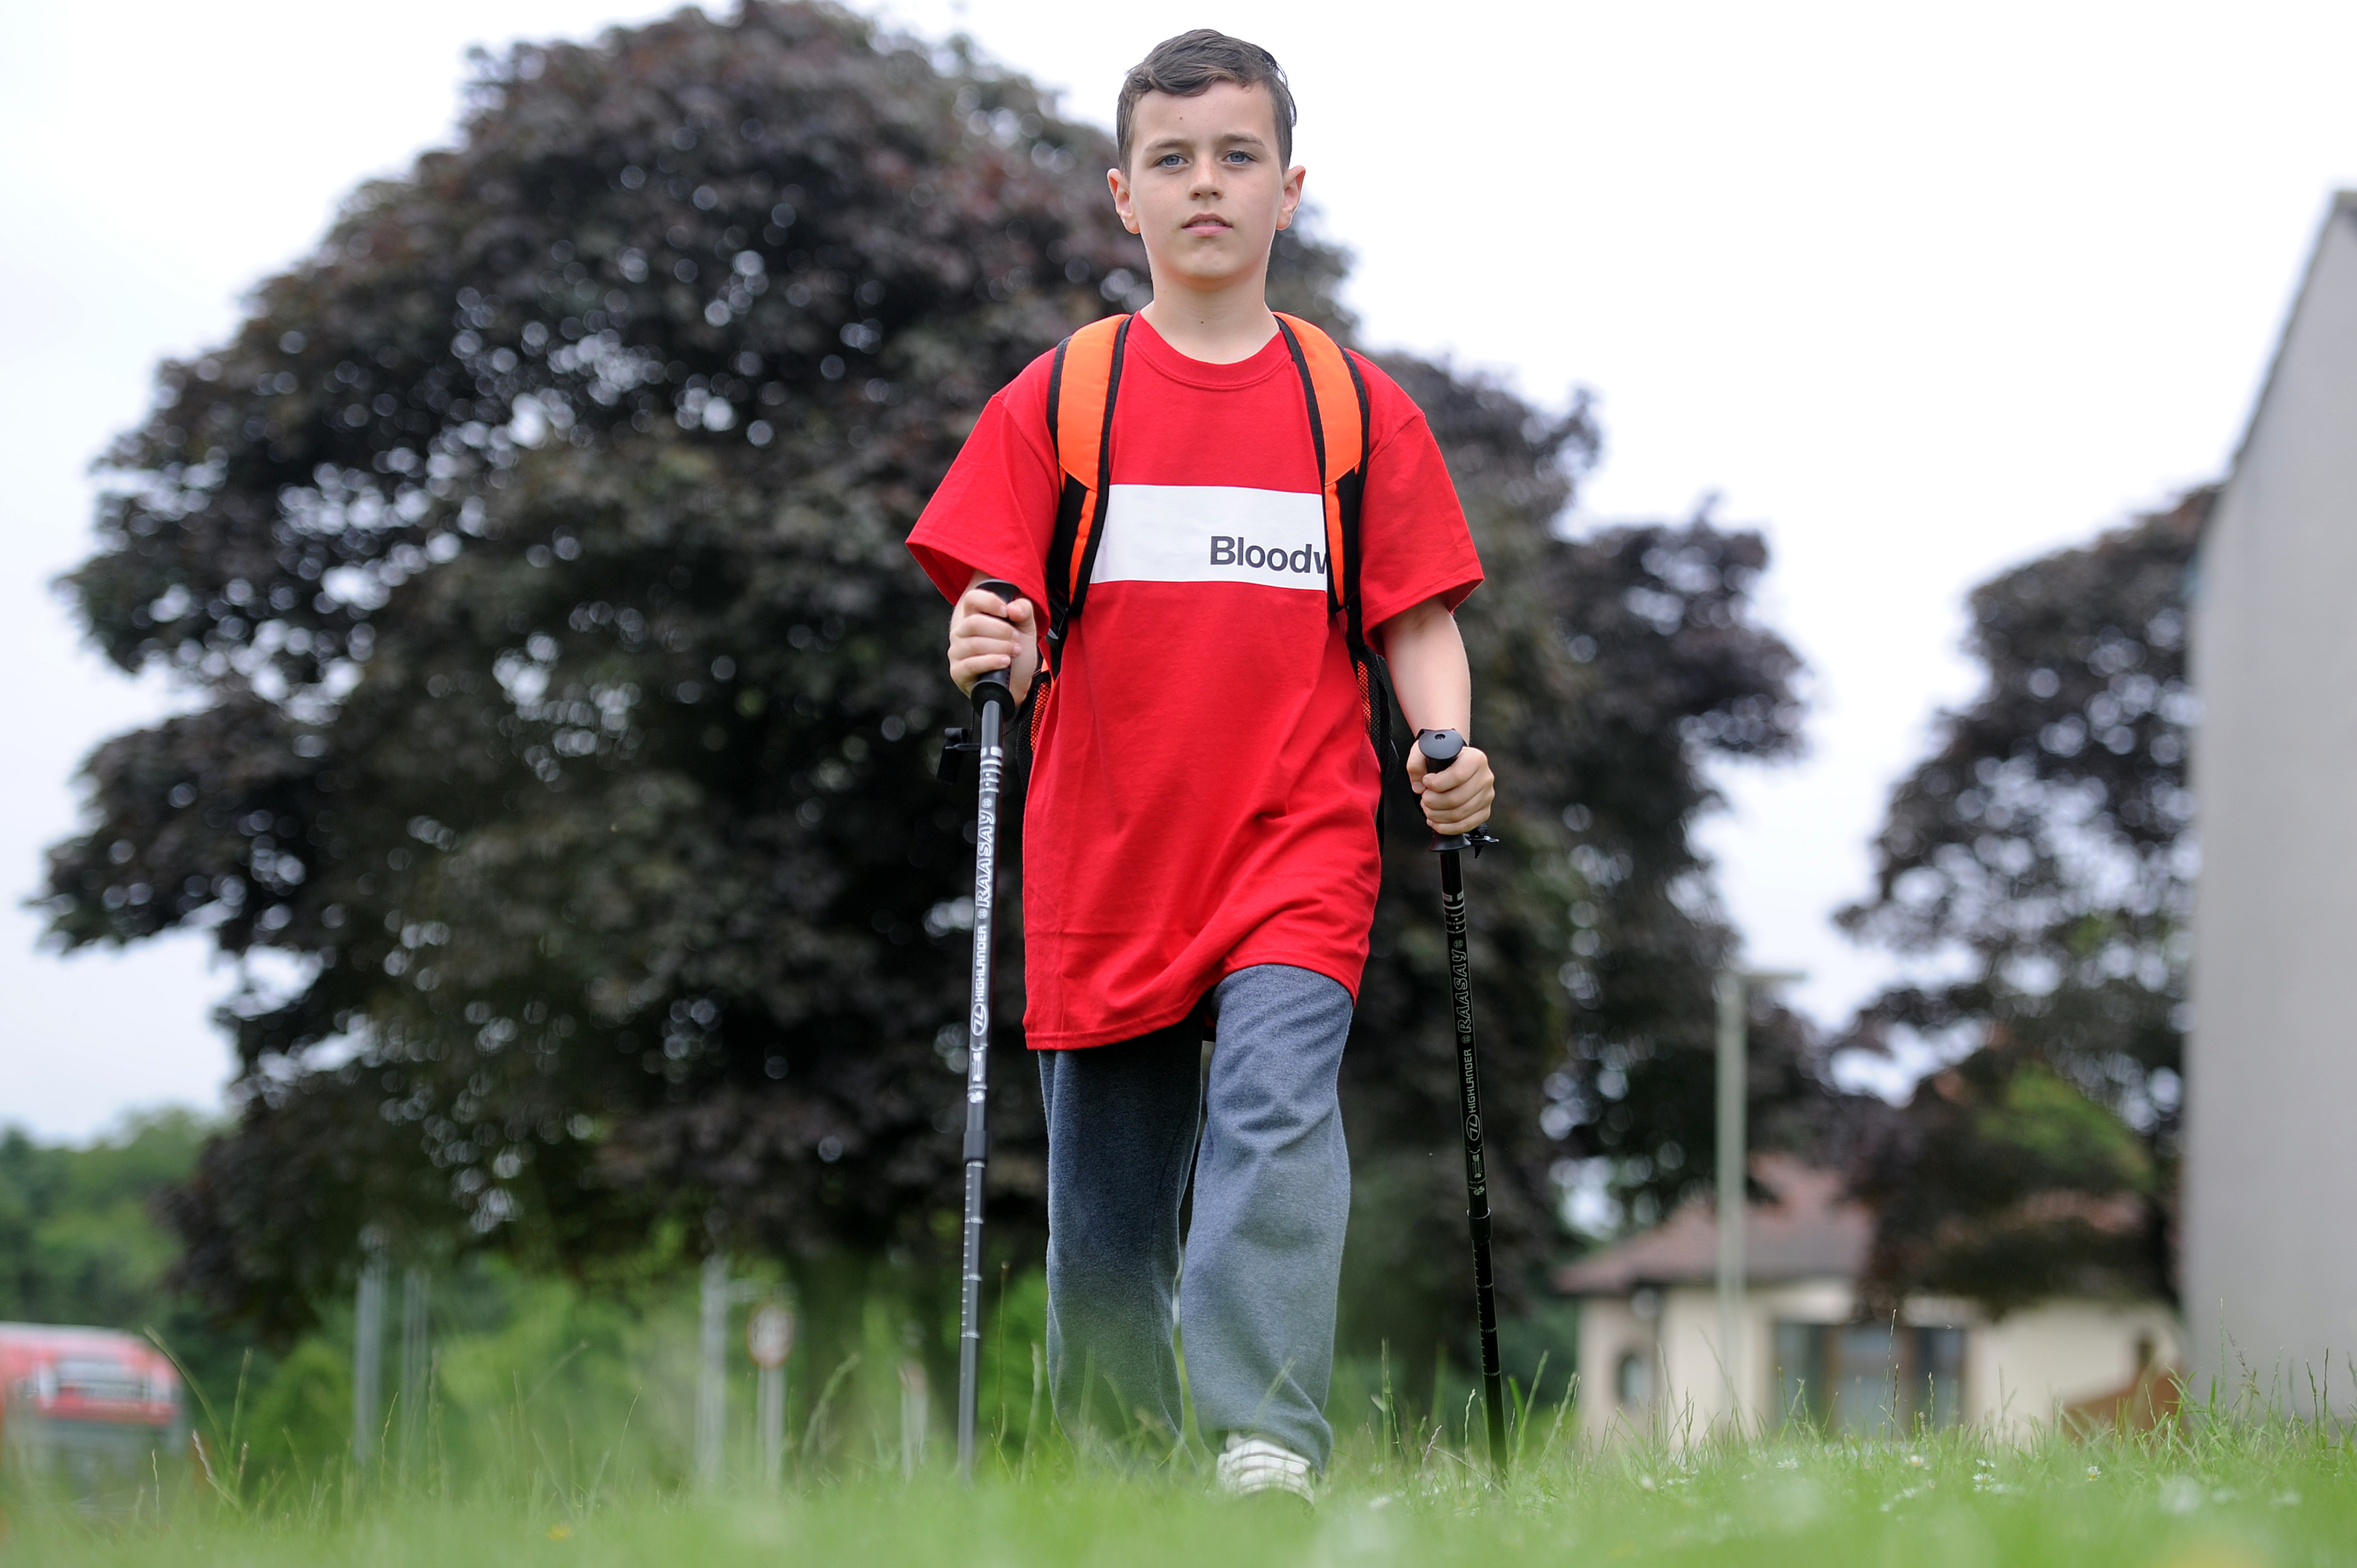 10-year-old Jack Lowe decided to climb Ben Nevis in aid of charity.